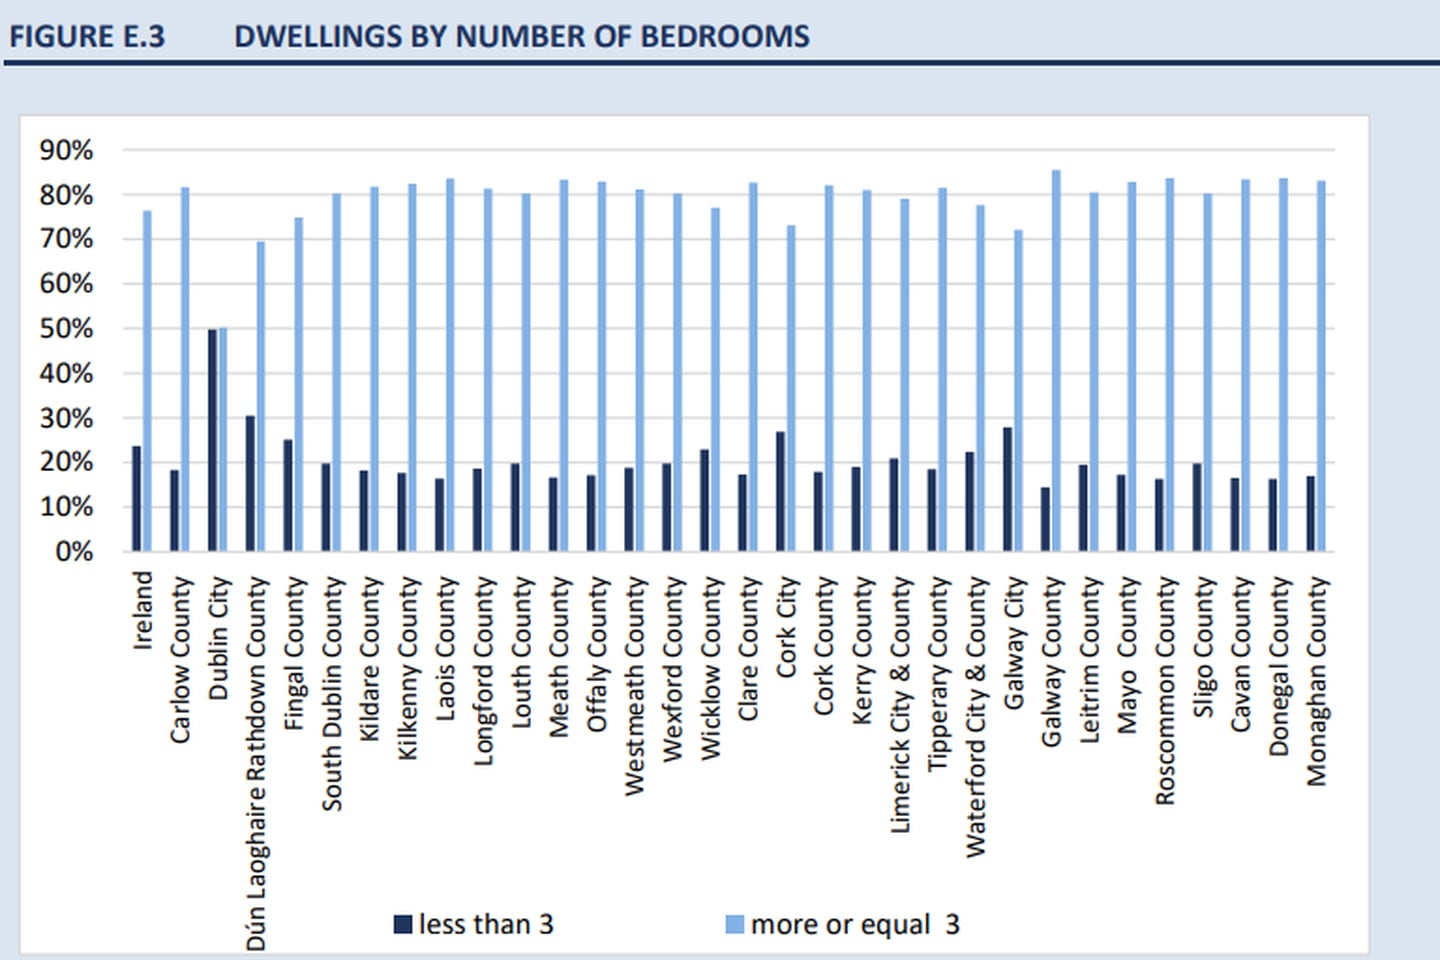 Ireland is by far the country with the smallest number of apartments, at 10.6% of the total housing stock. Together with the Netherlands (18.7%), it is the only EU
country where the proportion of apartments in the housing stock does not 
exceed the 20% threshold. The lack of smaller housing options in Ireland poses challenges for people who want to adapt their housing situation to stages of their lifecycle. Source: CSO Census of Population 2022/ESRI